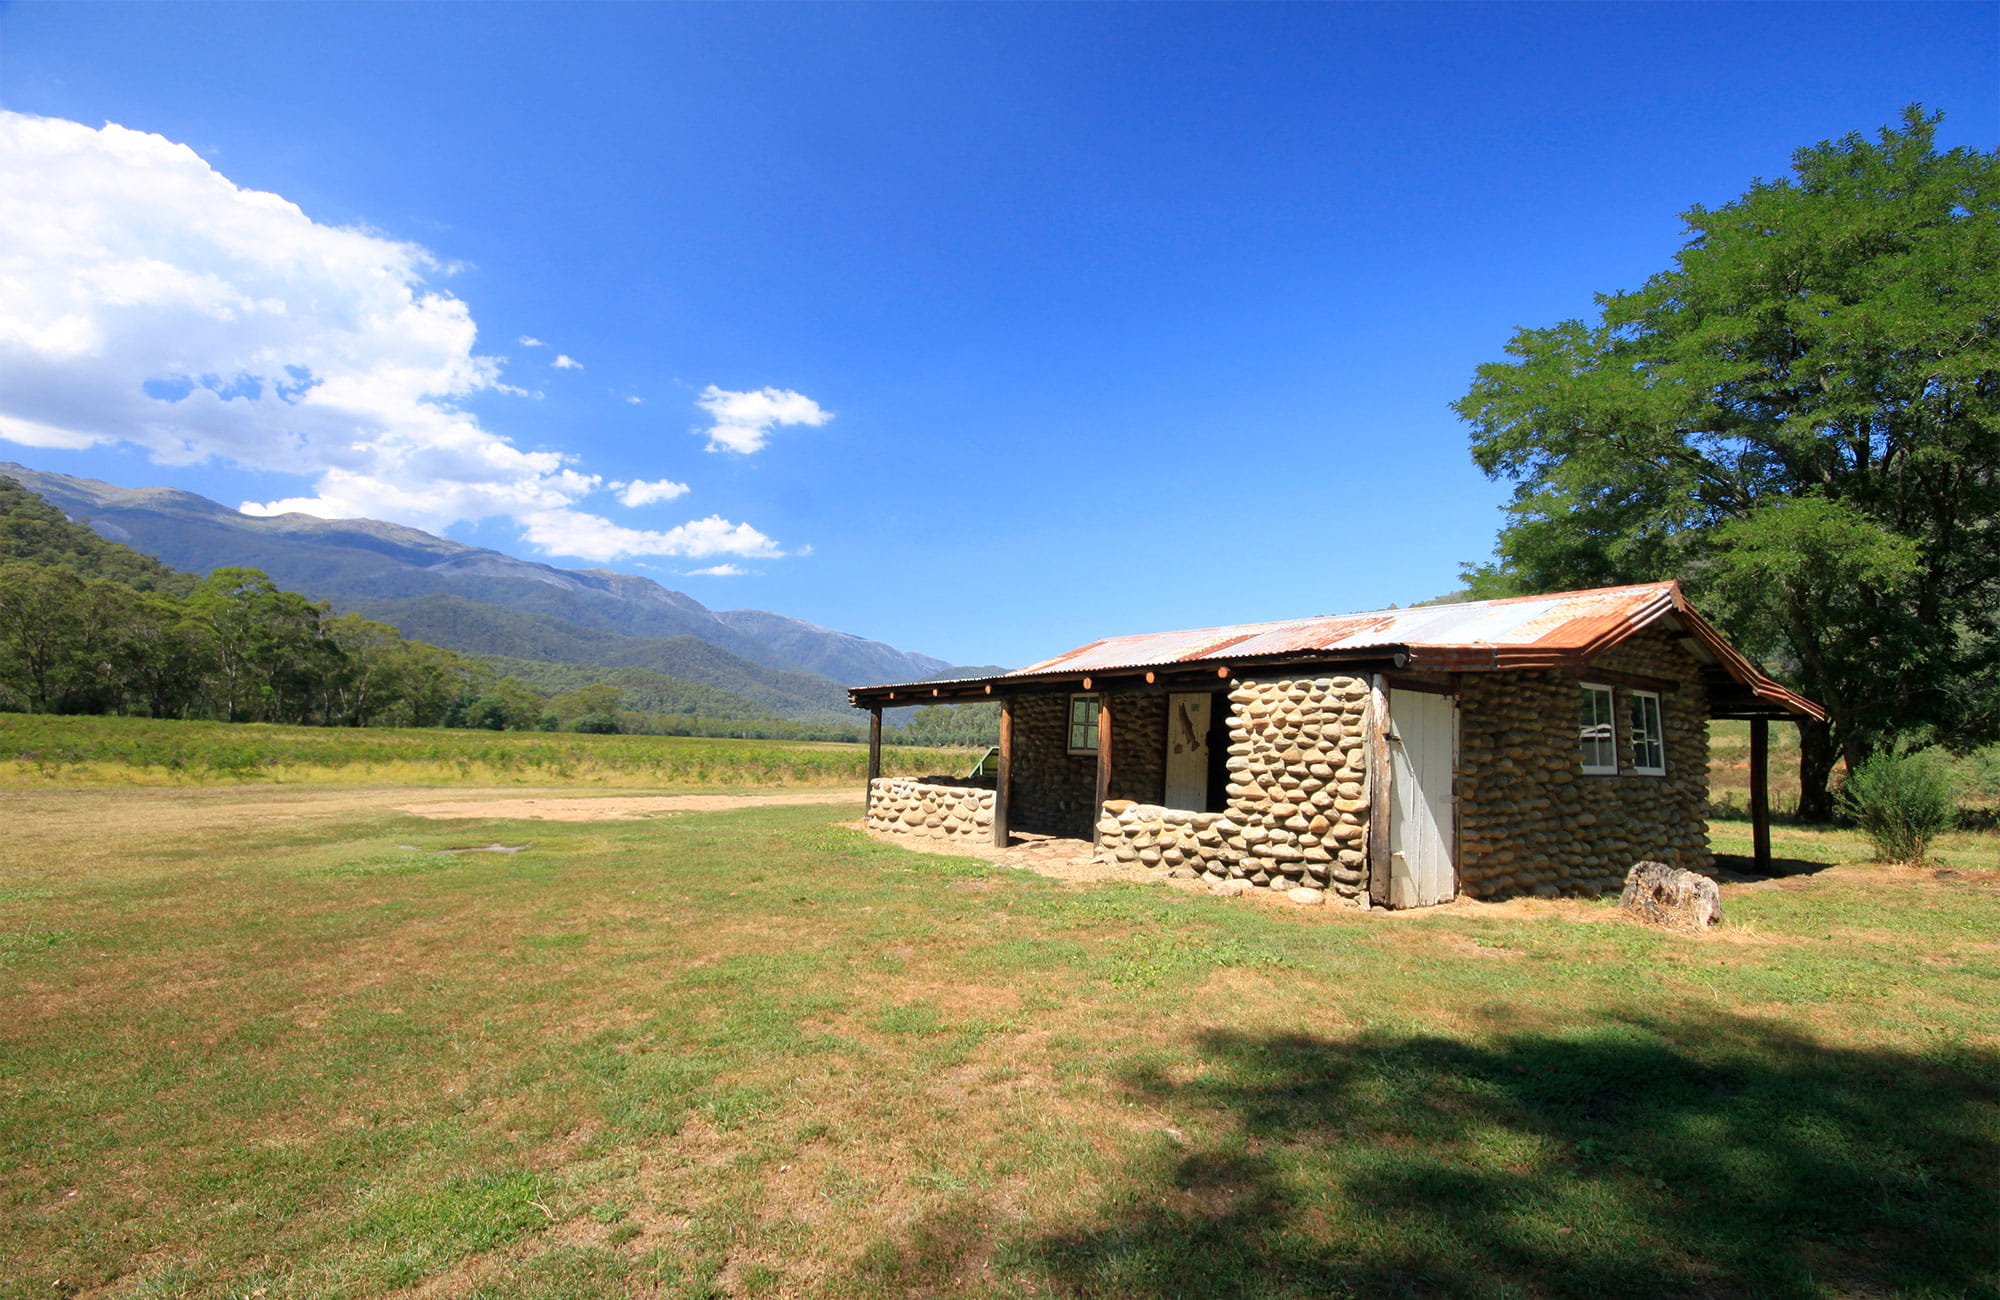 Historic hut on a grassy plain with mountains in the background. Photo: Elinor Sheargold/OEH.